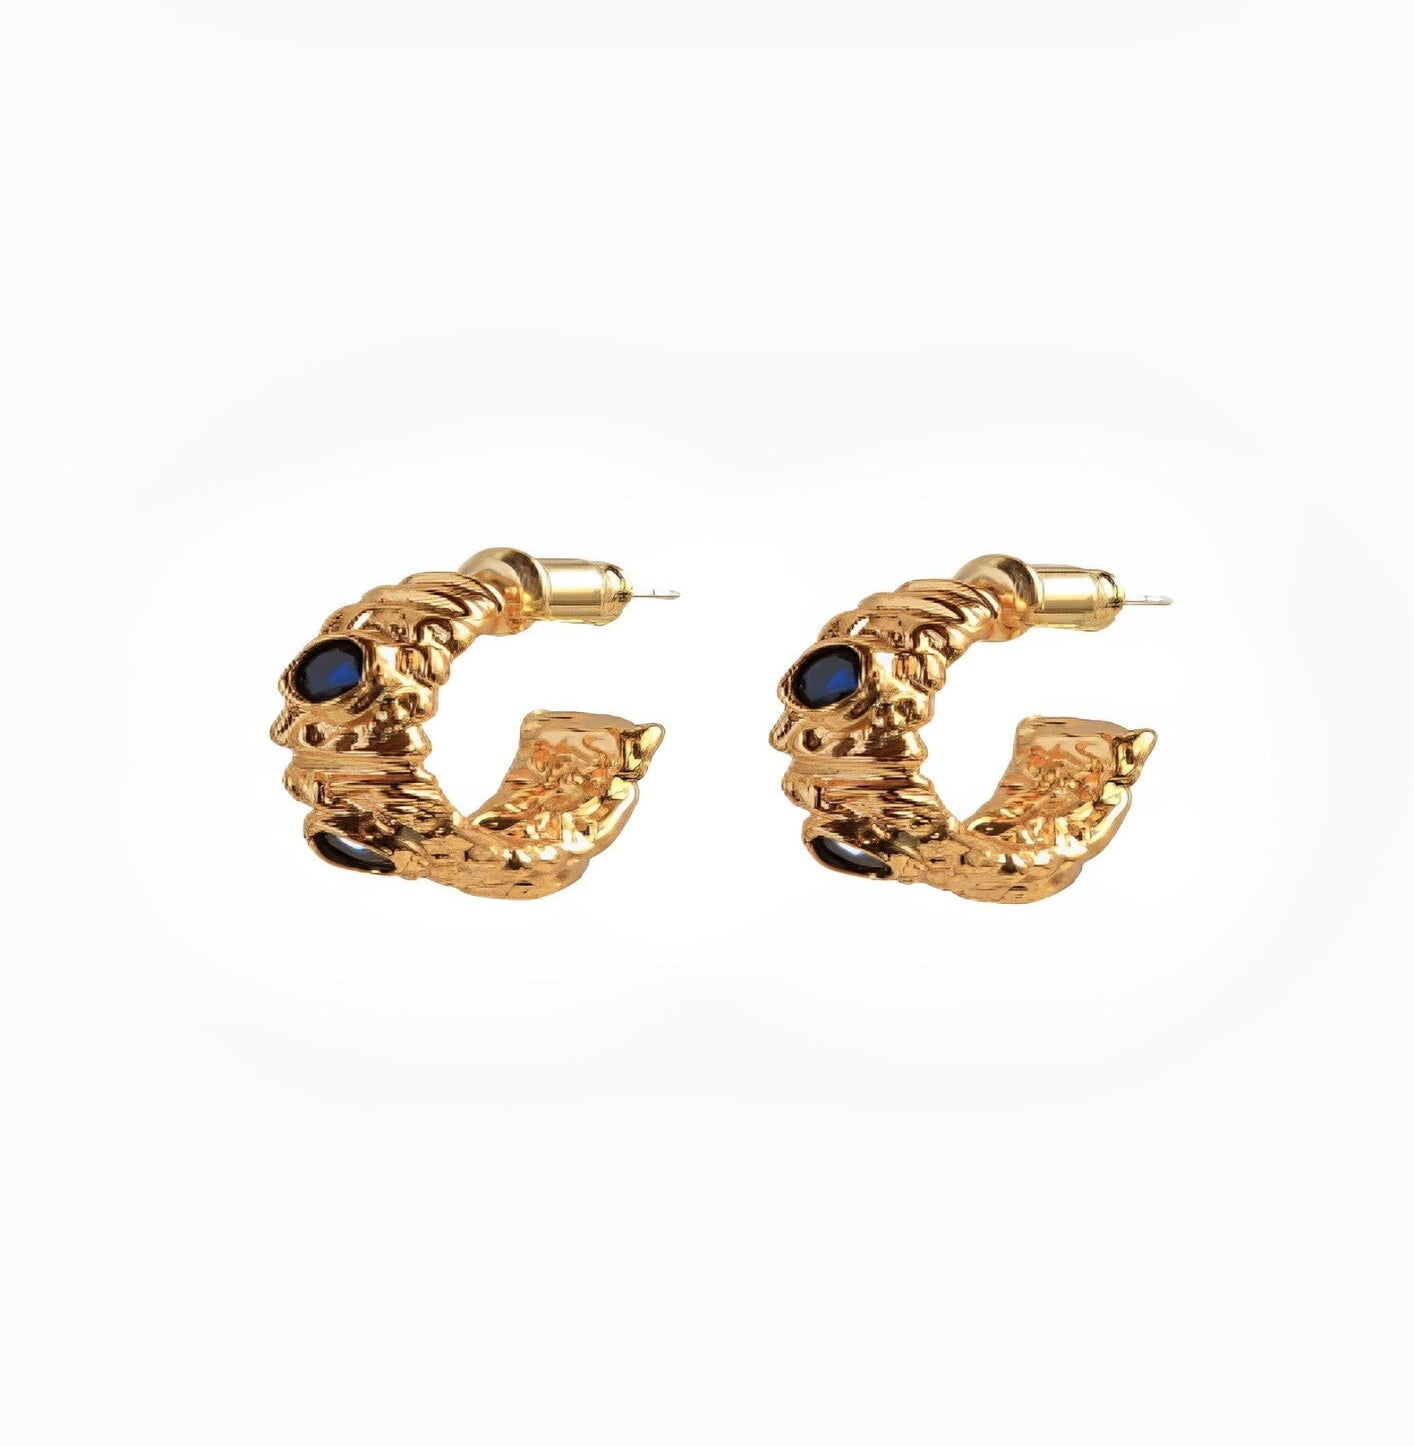 SAPPHIRE BLUE EARRINGS earing Yubama Jewelry Online Store - The Elegant Designs of Gold and Silver ! 